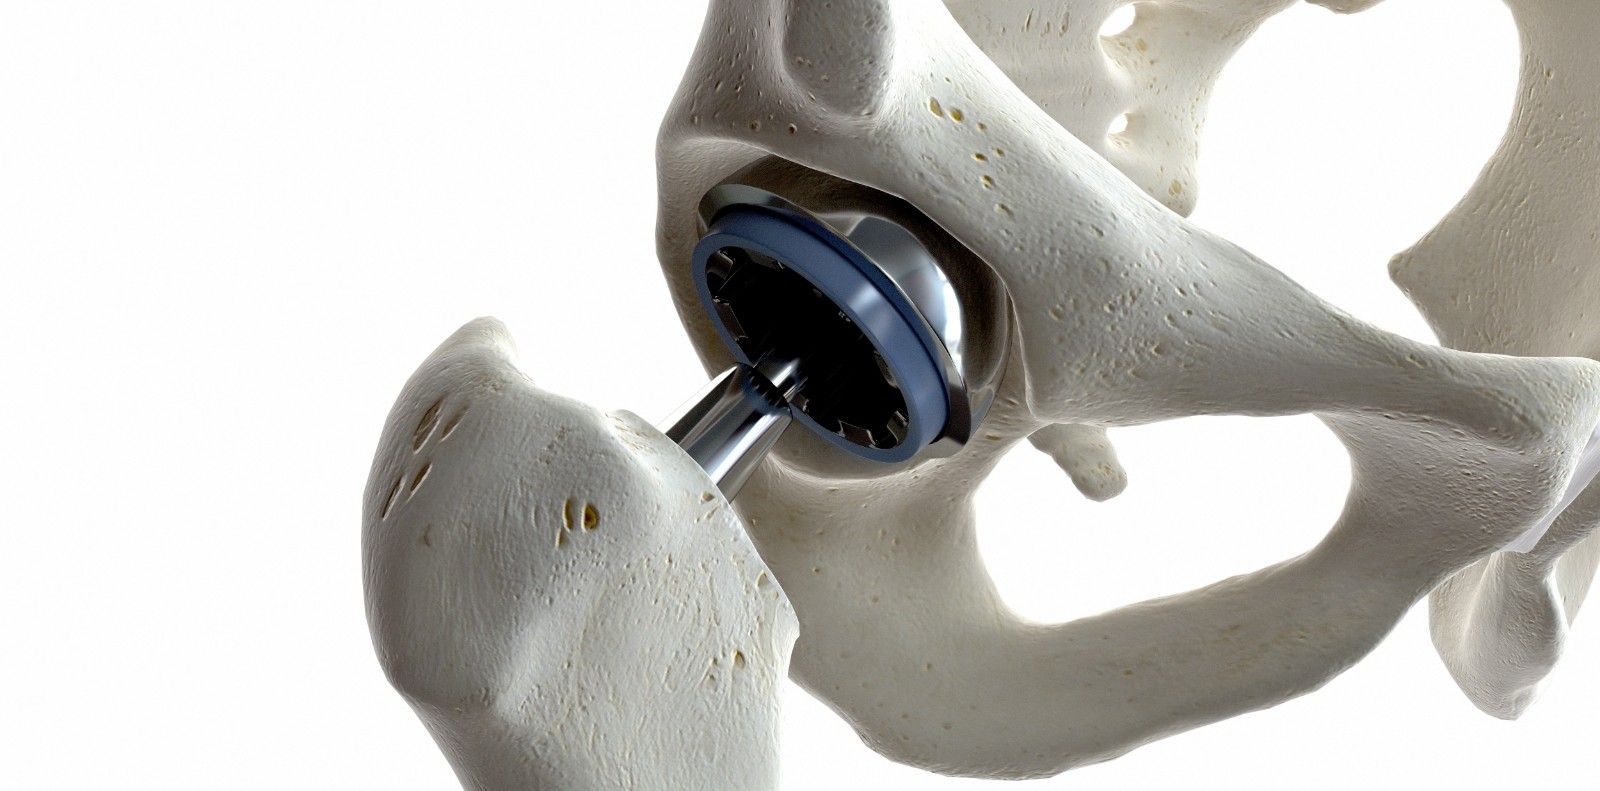 medically accurate illustration of a hip replacement